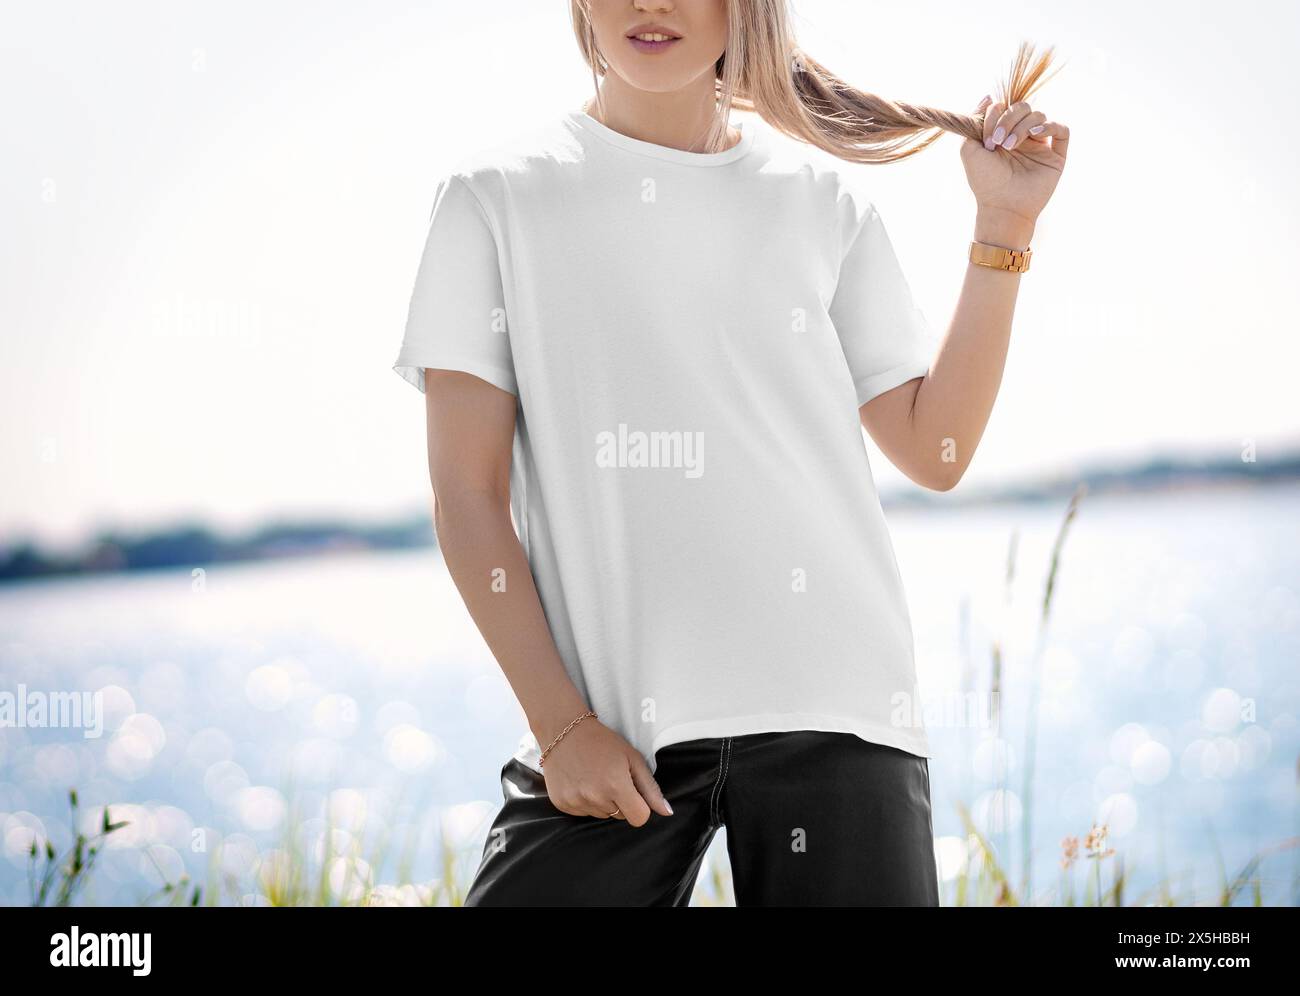 Template of a stylish white T-shirt with a round neck on a blonde girl, posing against the background of a river, front view. Female shirt mockup. Sum Stock Photo